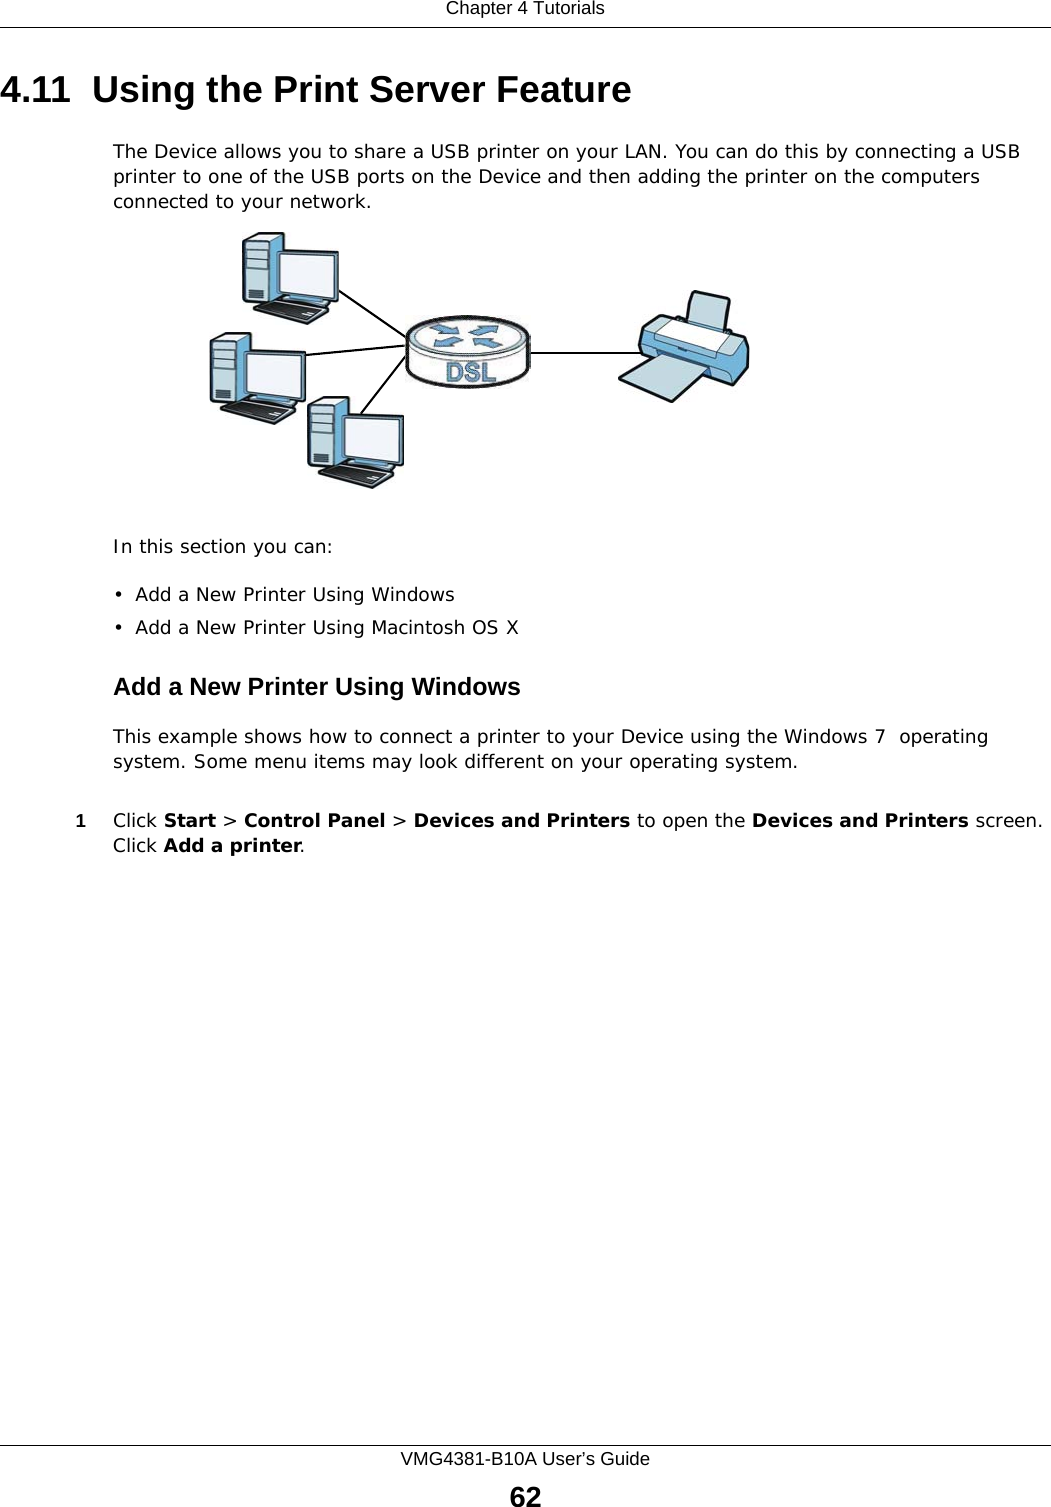 Chapter 4 TutorialsVMG4381-B10A User’s Guide624.11  Using the Print Server FeatureThe Device allows you to share a USB printer on your LAN. You can do this by connecting a USB printer to one of the USB ports on the Device and then adding the printer on the computers connected to your network.In this section you can:• Add a New Printer Using Windows• Add a New Printer Using Macintosh OS XAdd a New Printer Using WindowsThis example shows how to connect a printer to your Device using the Windows 7  operating system. Some menu items may look different on your operating system.1Click Start &gt; Control Panel &gt; Devices and Printers to open the Devices and Printers screen. Click Add a printer. 